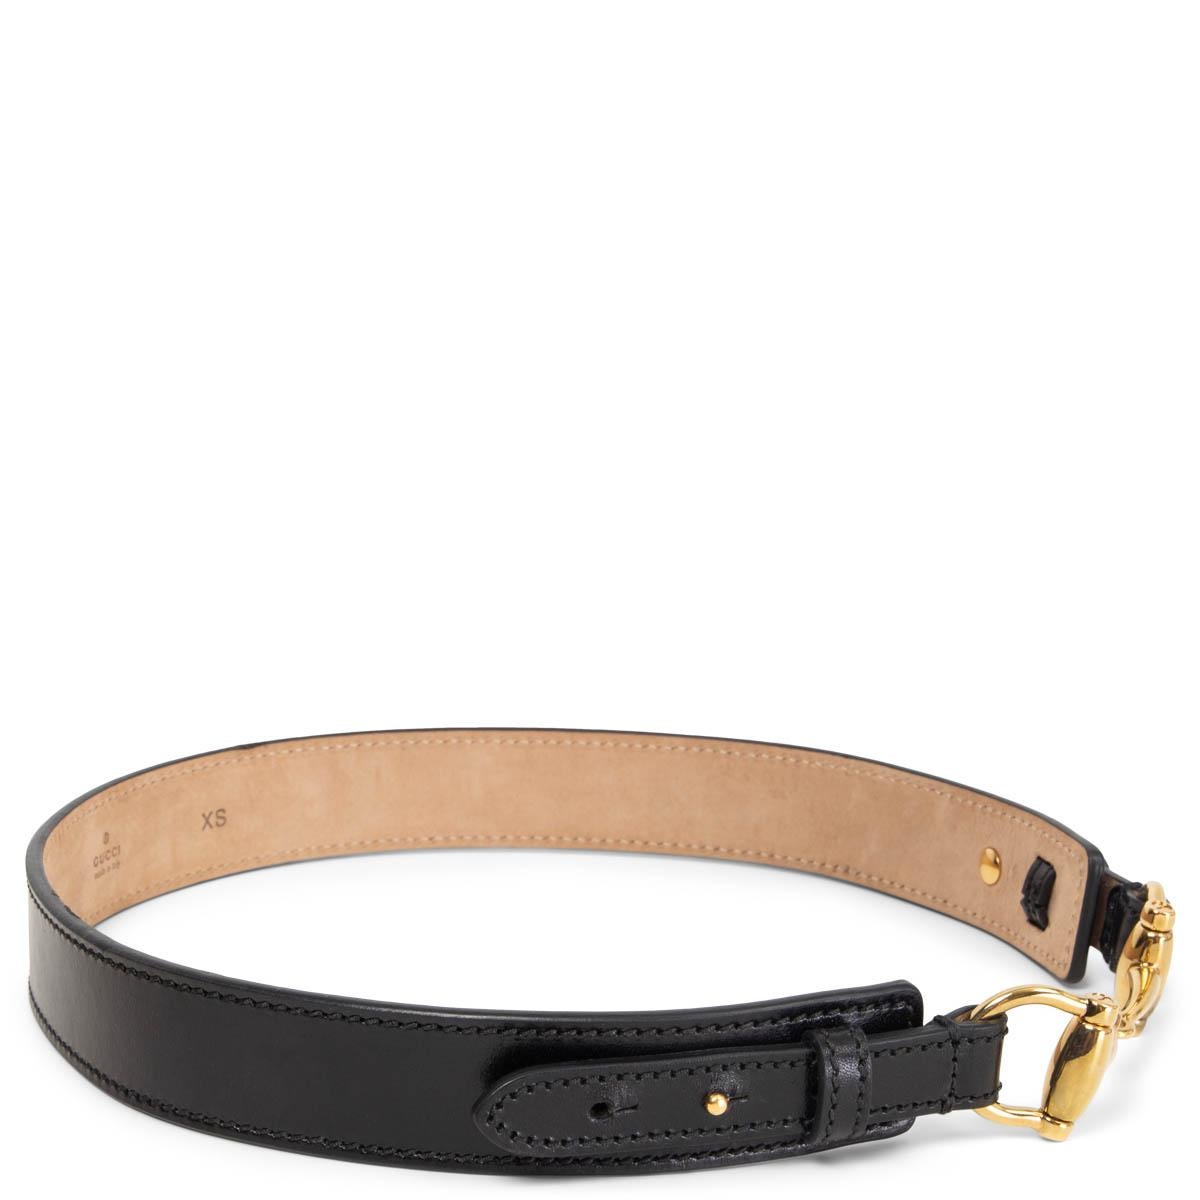 100% authentic Gucci horse-bit waist belt in black calfskin featuring gold-tone metal horse-bit in the middle. Has been worn and is in excellent condition. 

Tag Size	XS
Width	3cm (1.2in)
Fits	62cm (24.2in) to 70cm (27.3in)
Length	79cm